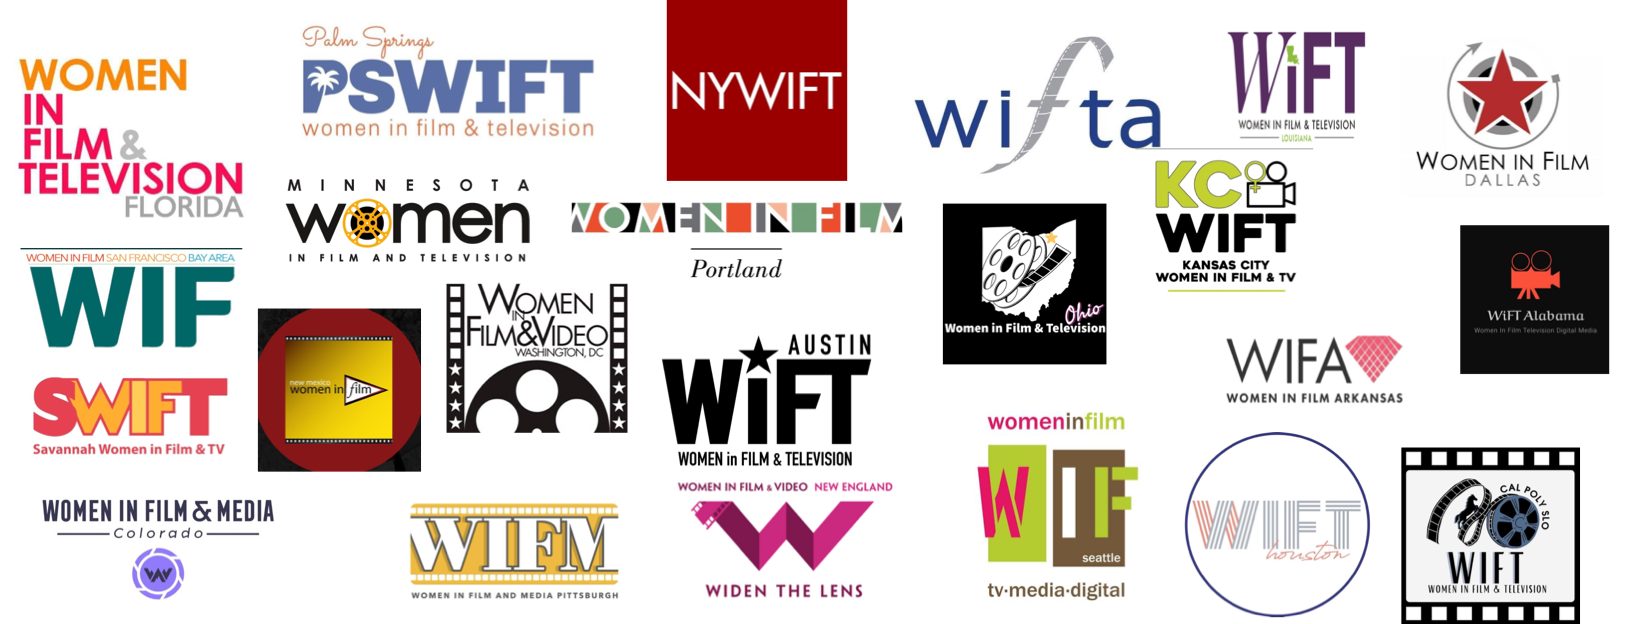 women in film chapters in the US